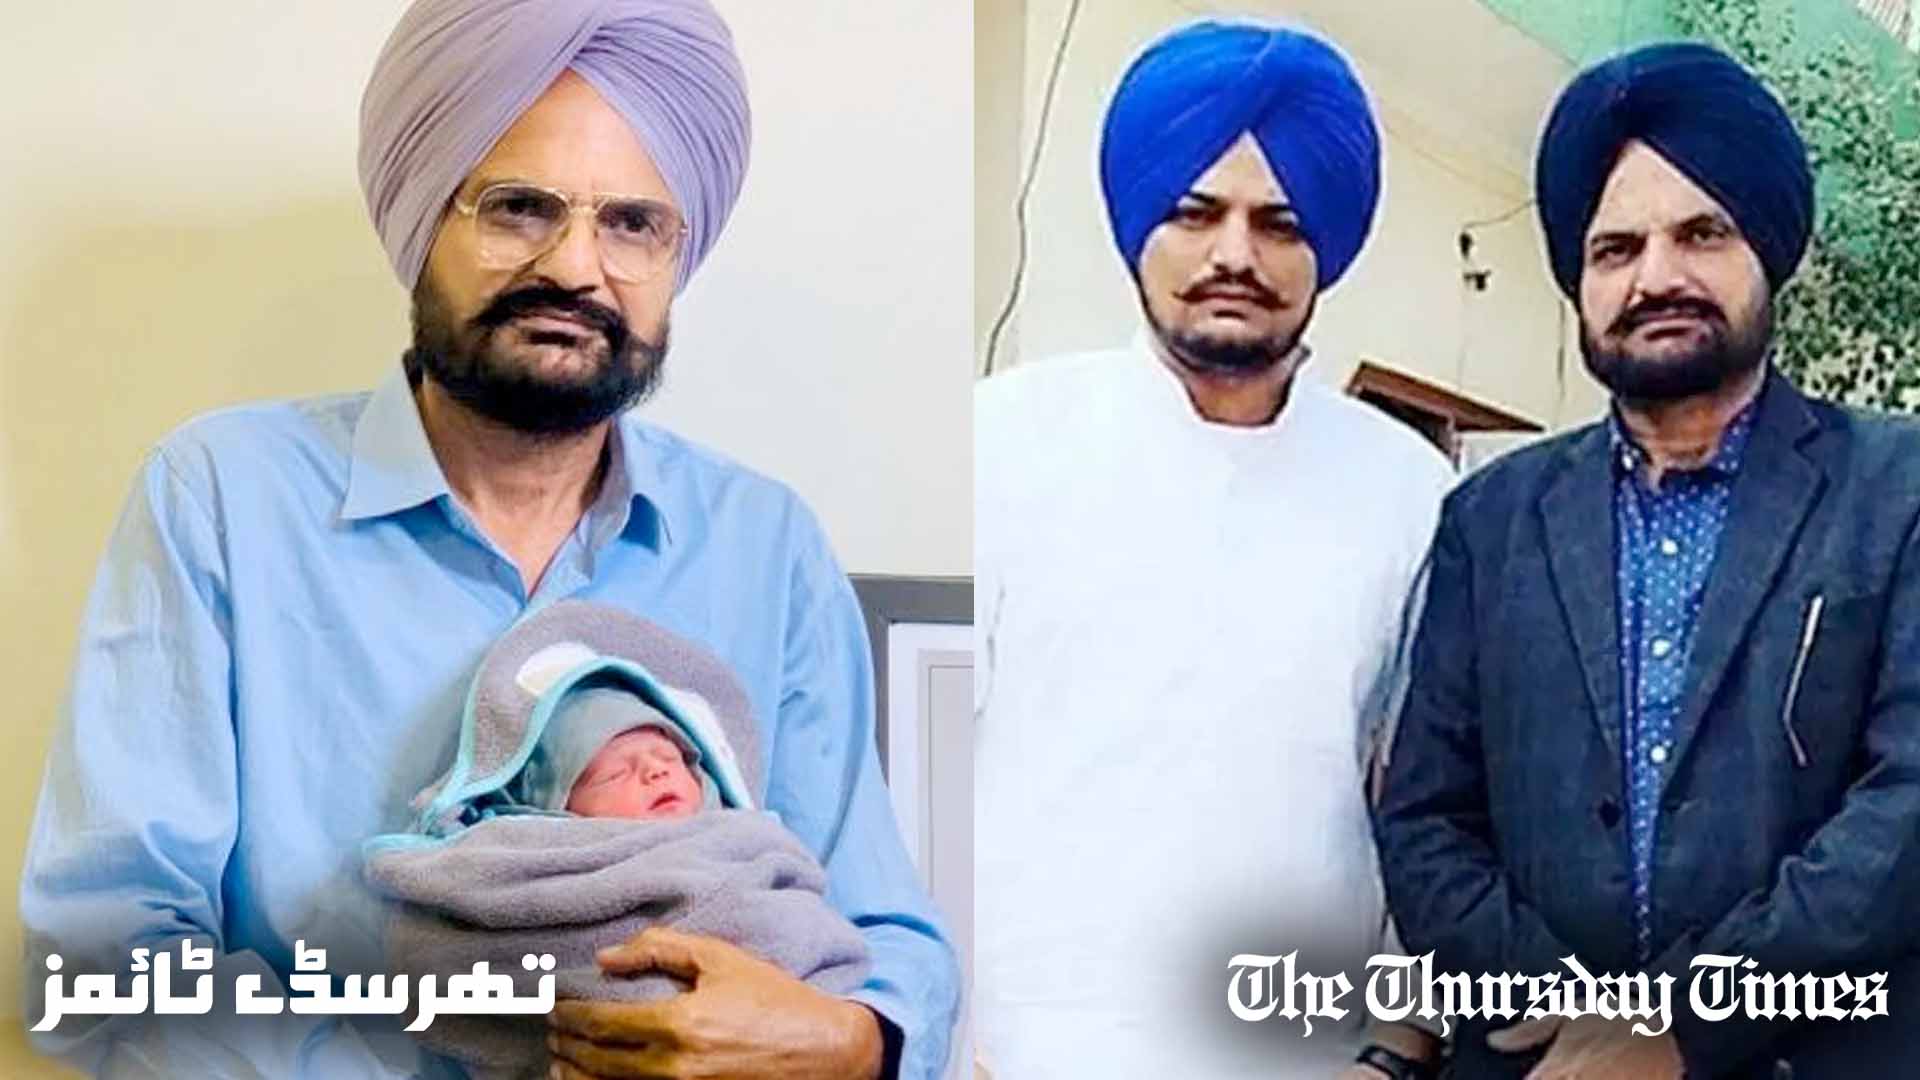 A combined file photo shows the father of late musician Sidhu Moosewala, Sardar Balkaur Sidhu, with his newborn son (L) and late son (R). — FILE/THE THURSDAY TIMES